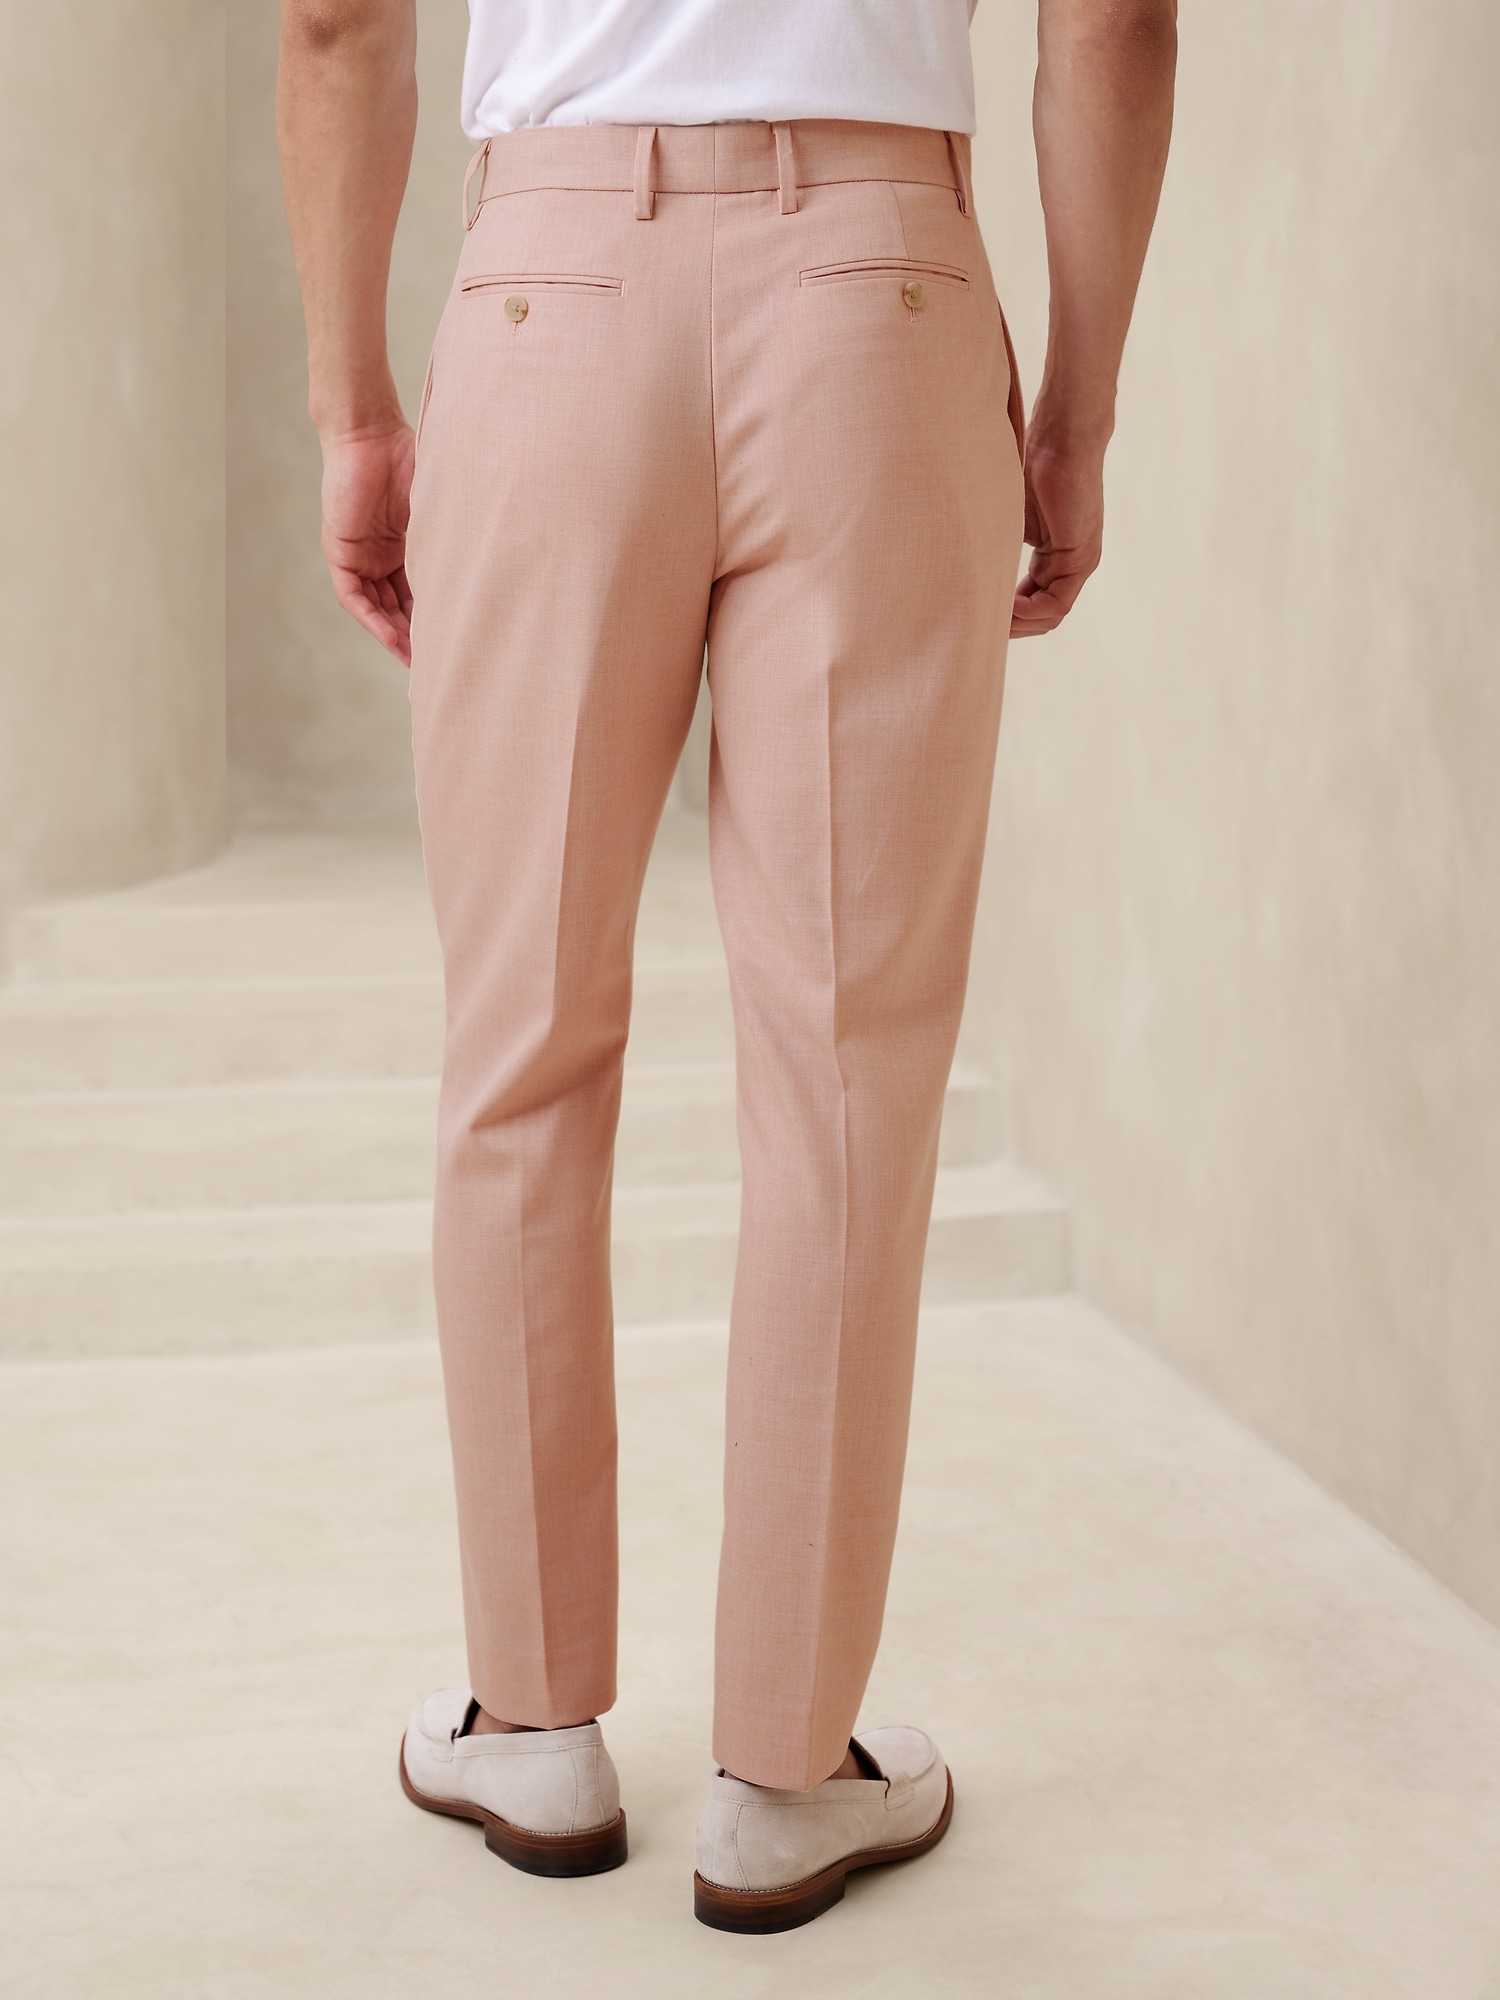 Buy Allen Solly Men Pink Ultra Slim Fit Solid Casual Trousers online